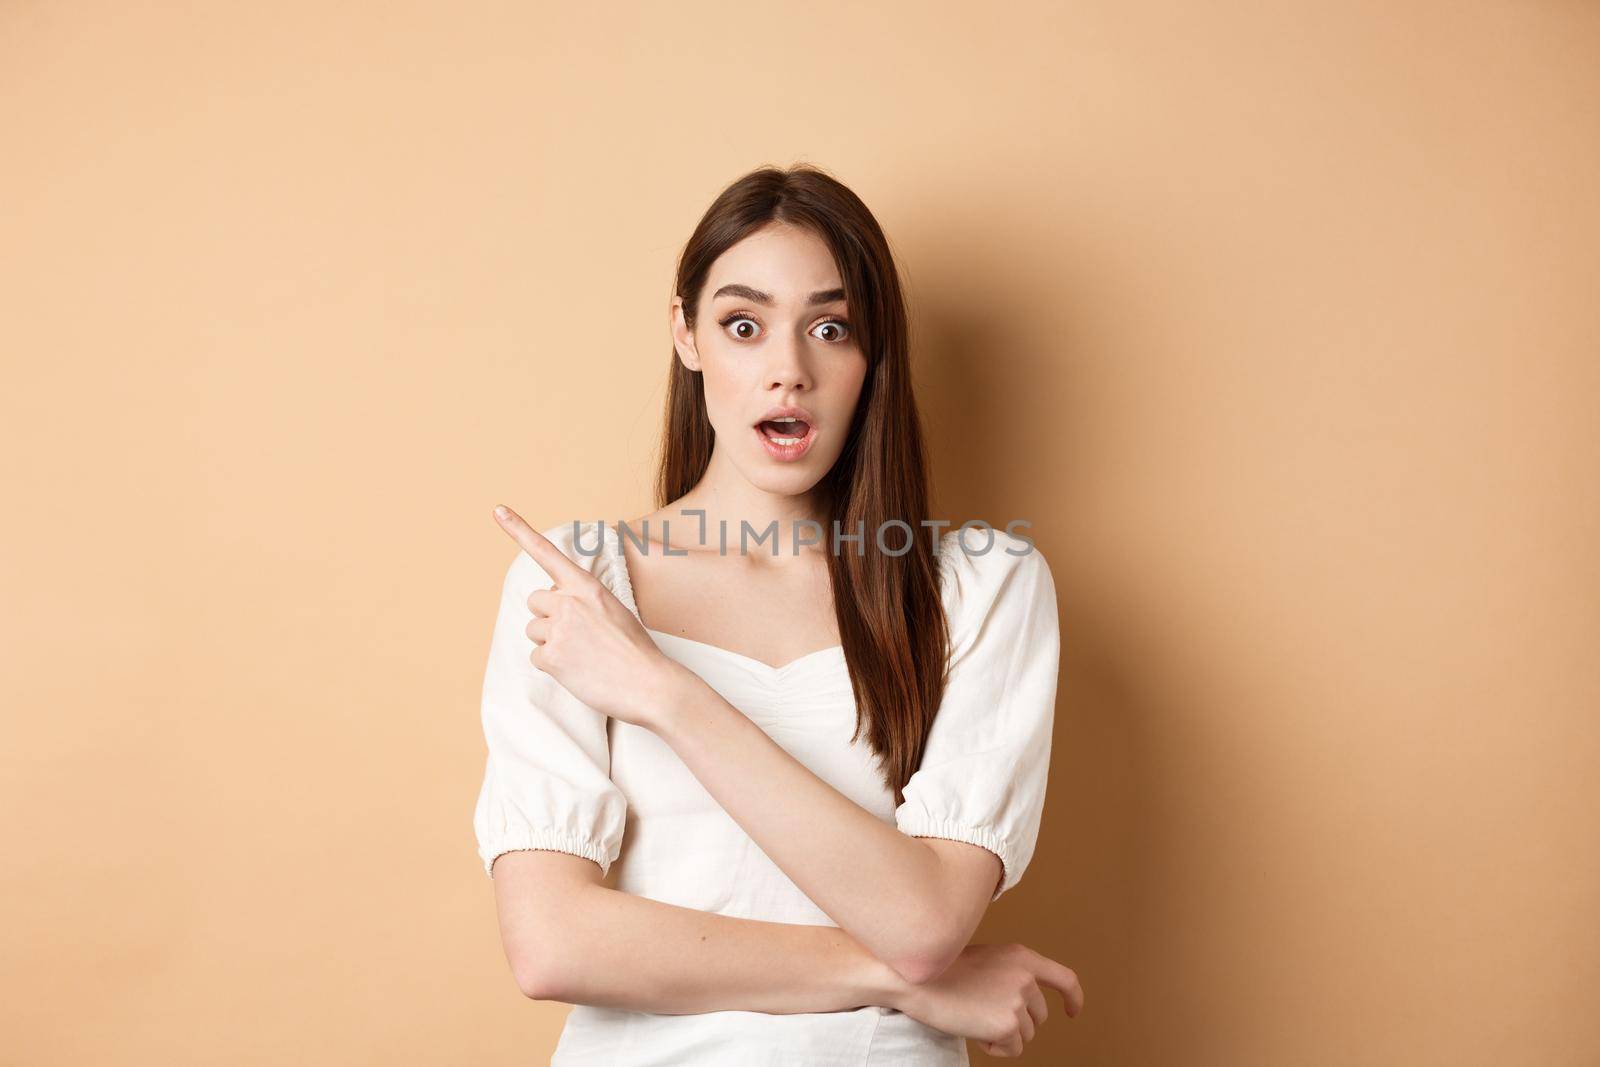 Surprised young girl say wow, pointing finger left at interesting banner, standing curious against beige background.